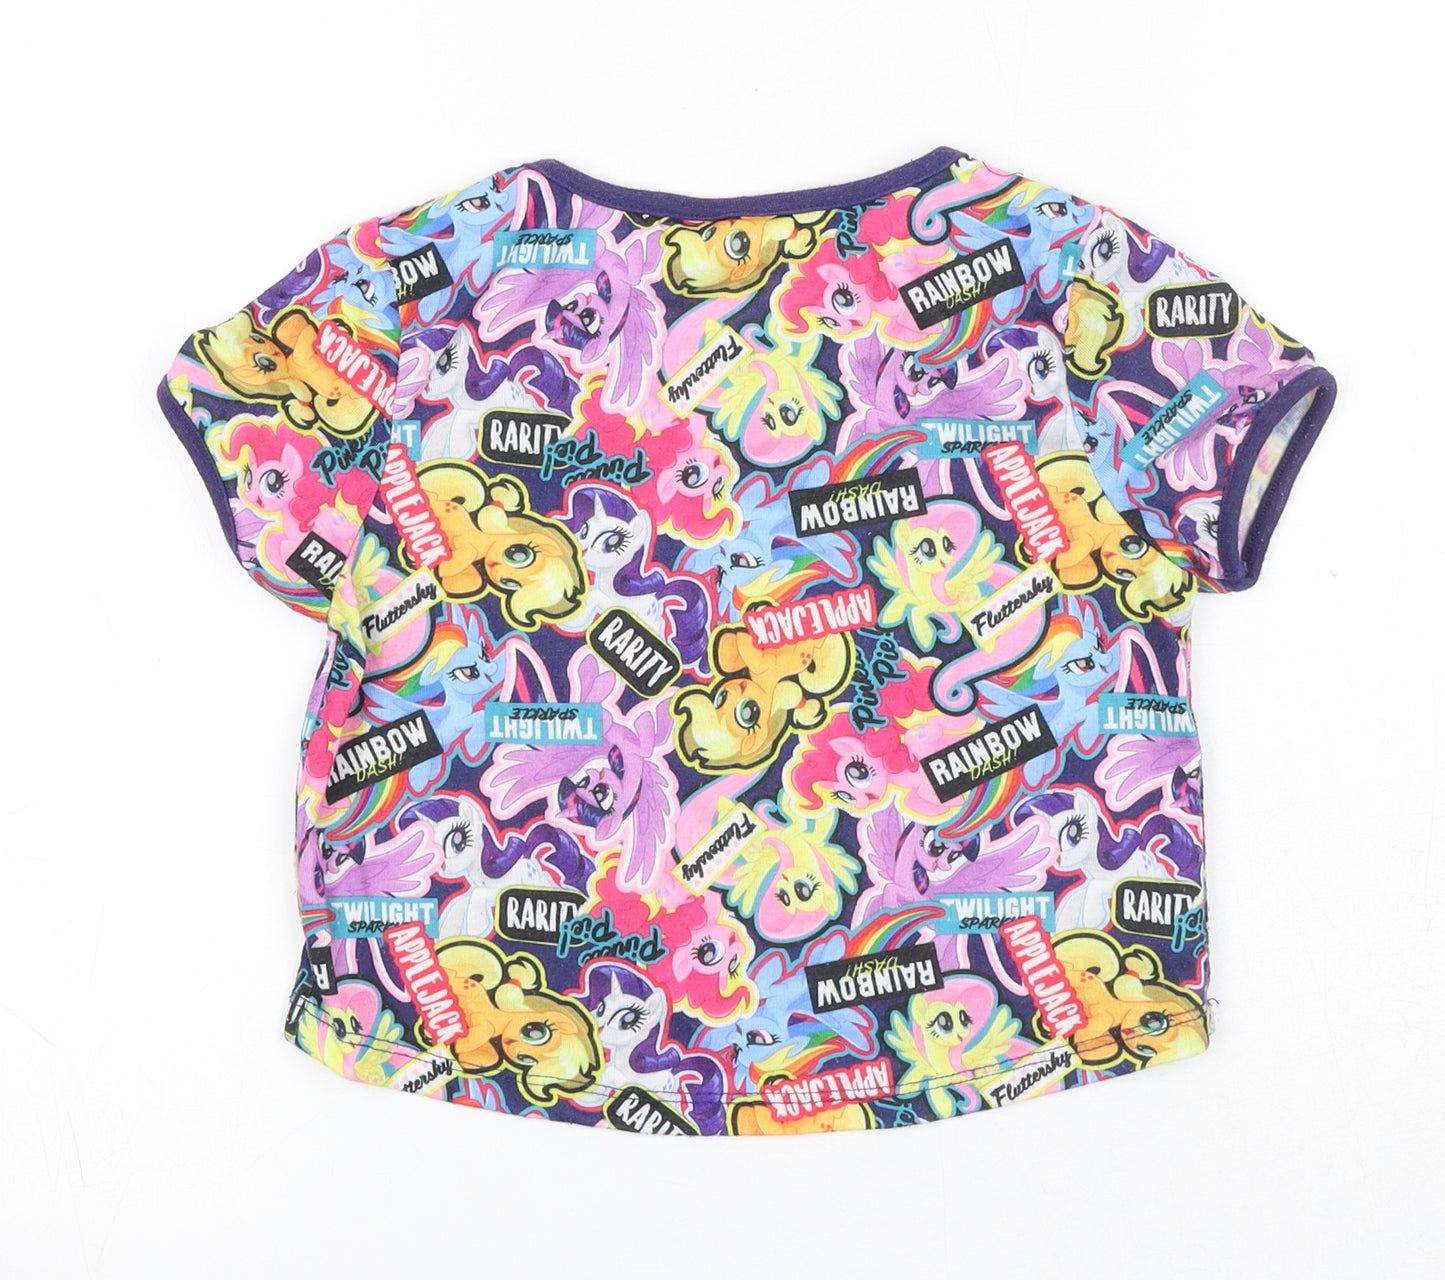 My Little Pony Girls Multicoloured Geometric Polyester Pullover T-Shirt Size 7-8 Years Boat Neck Pullover